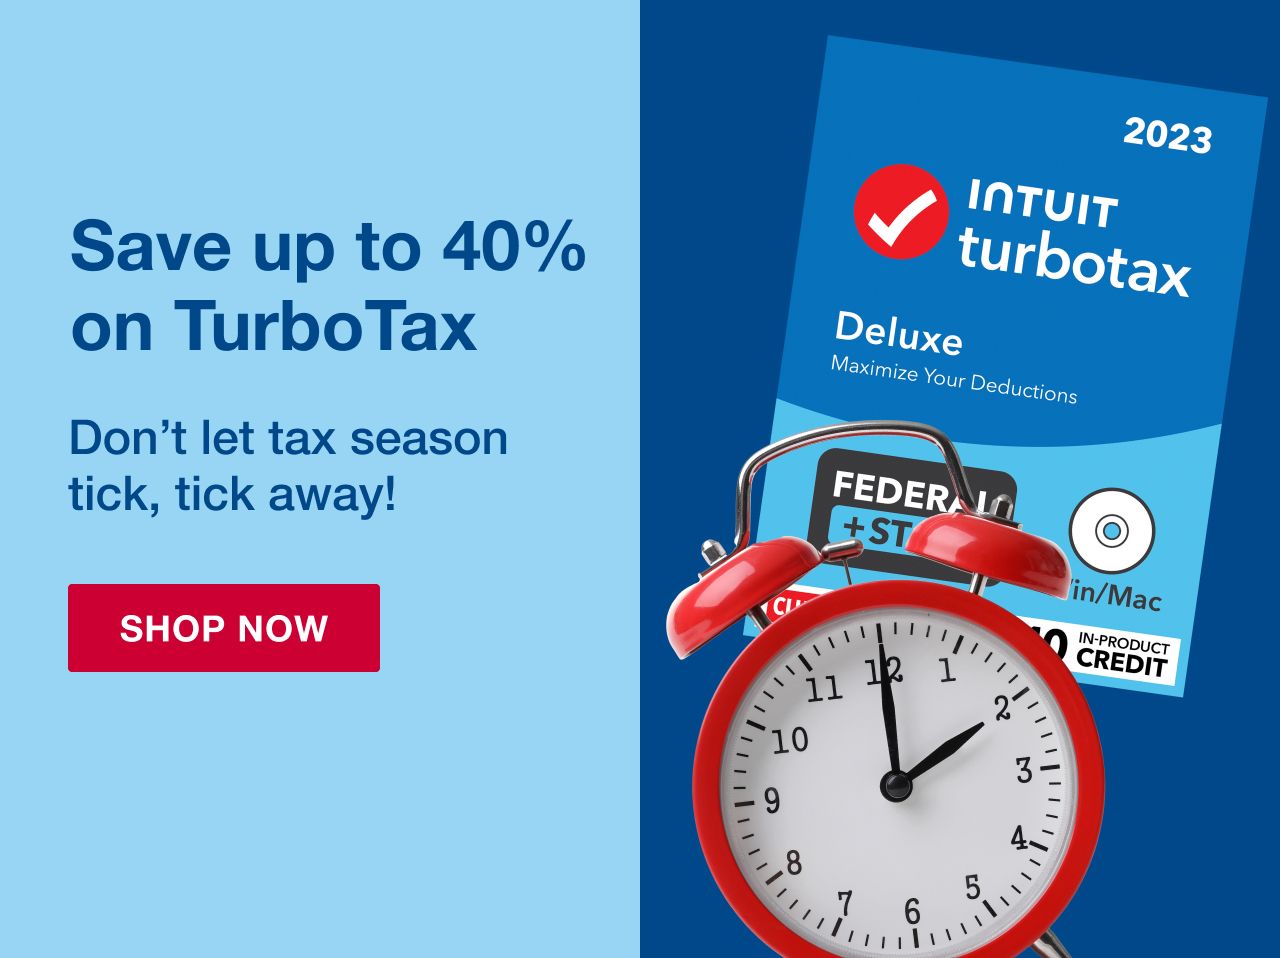 Save up to 40% on TurboTax. Don't let tax season tick, tick away! Click here to shop now